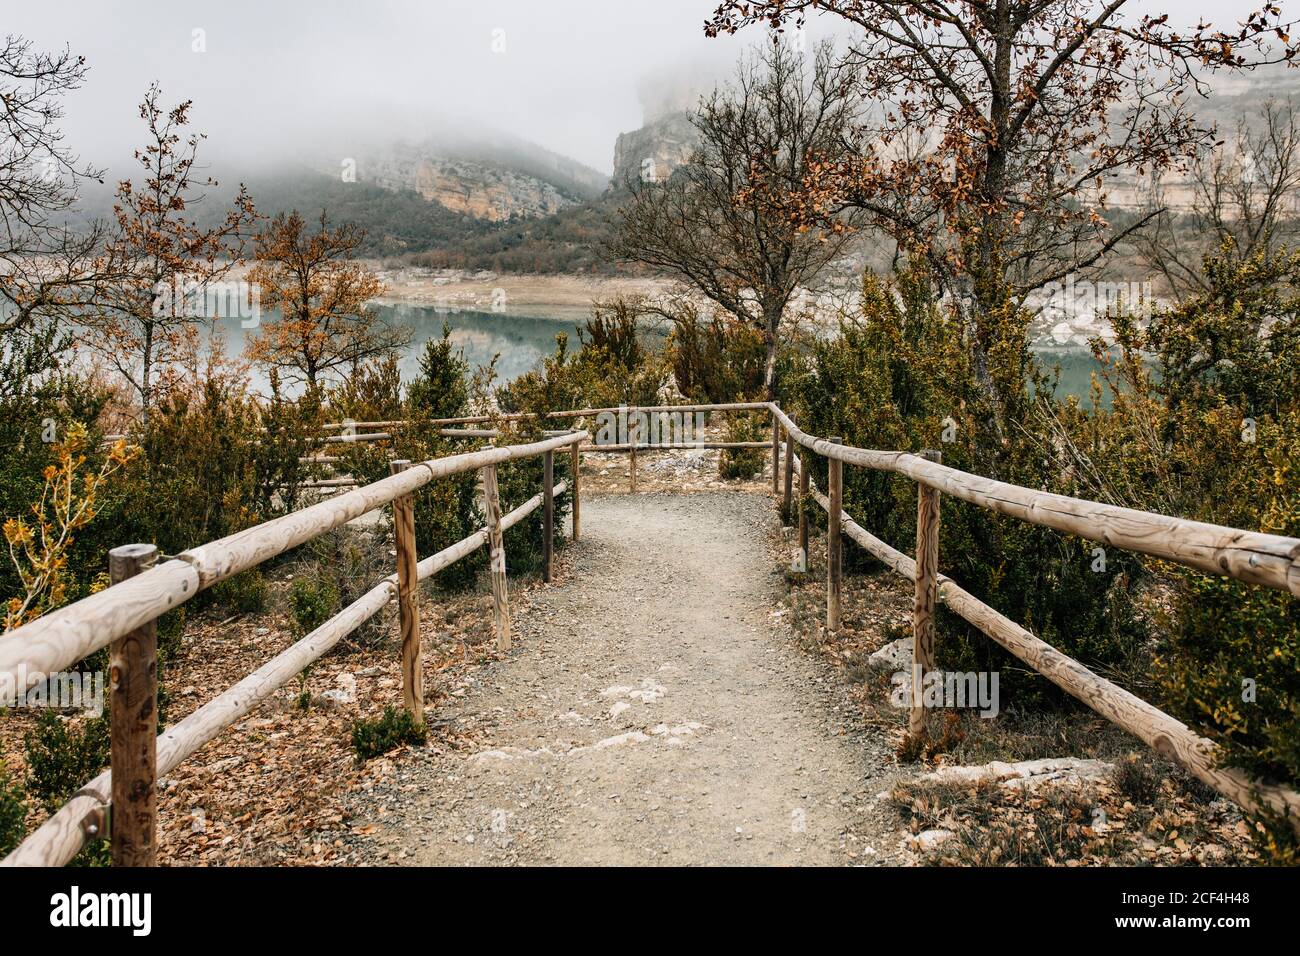 Empty curved path with wooden railing leading among trees with dry foliage on hill slope near mountain lake in foggy day in Montsec Range in Spain Stock Photo